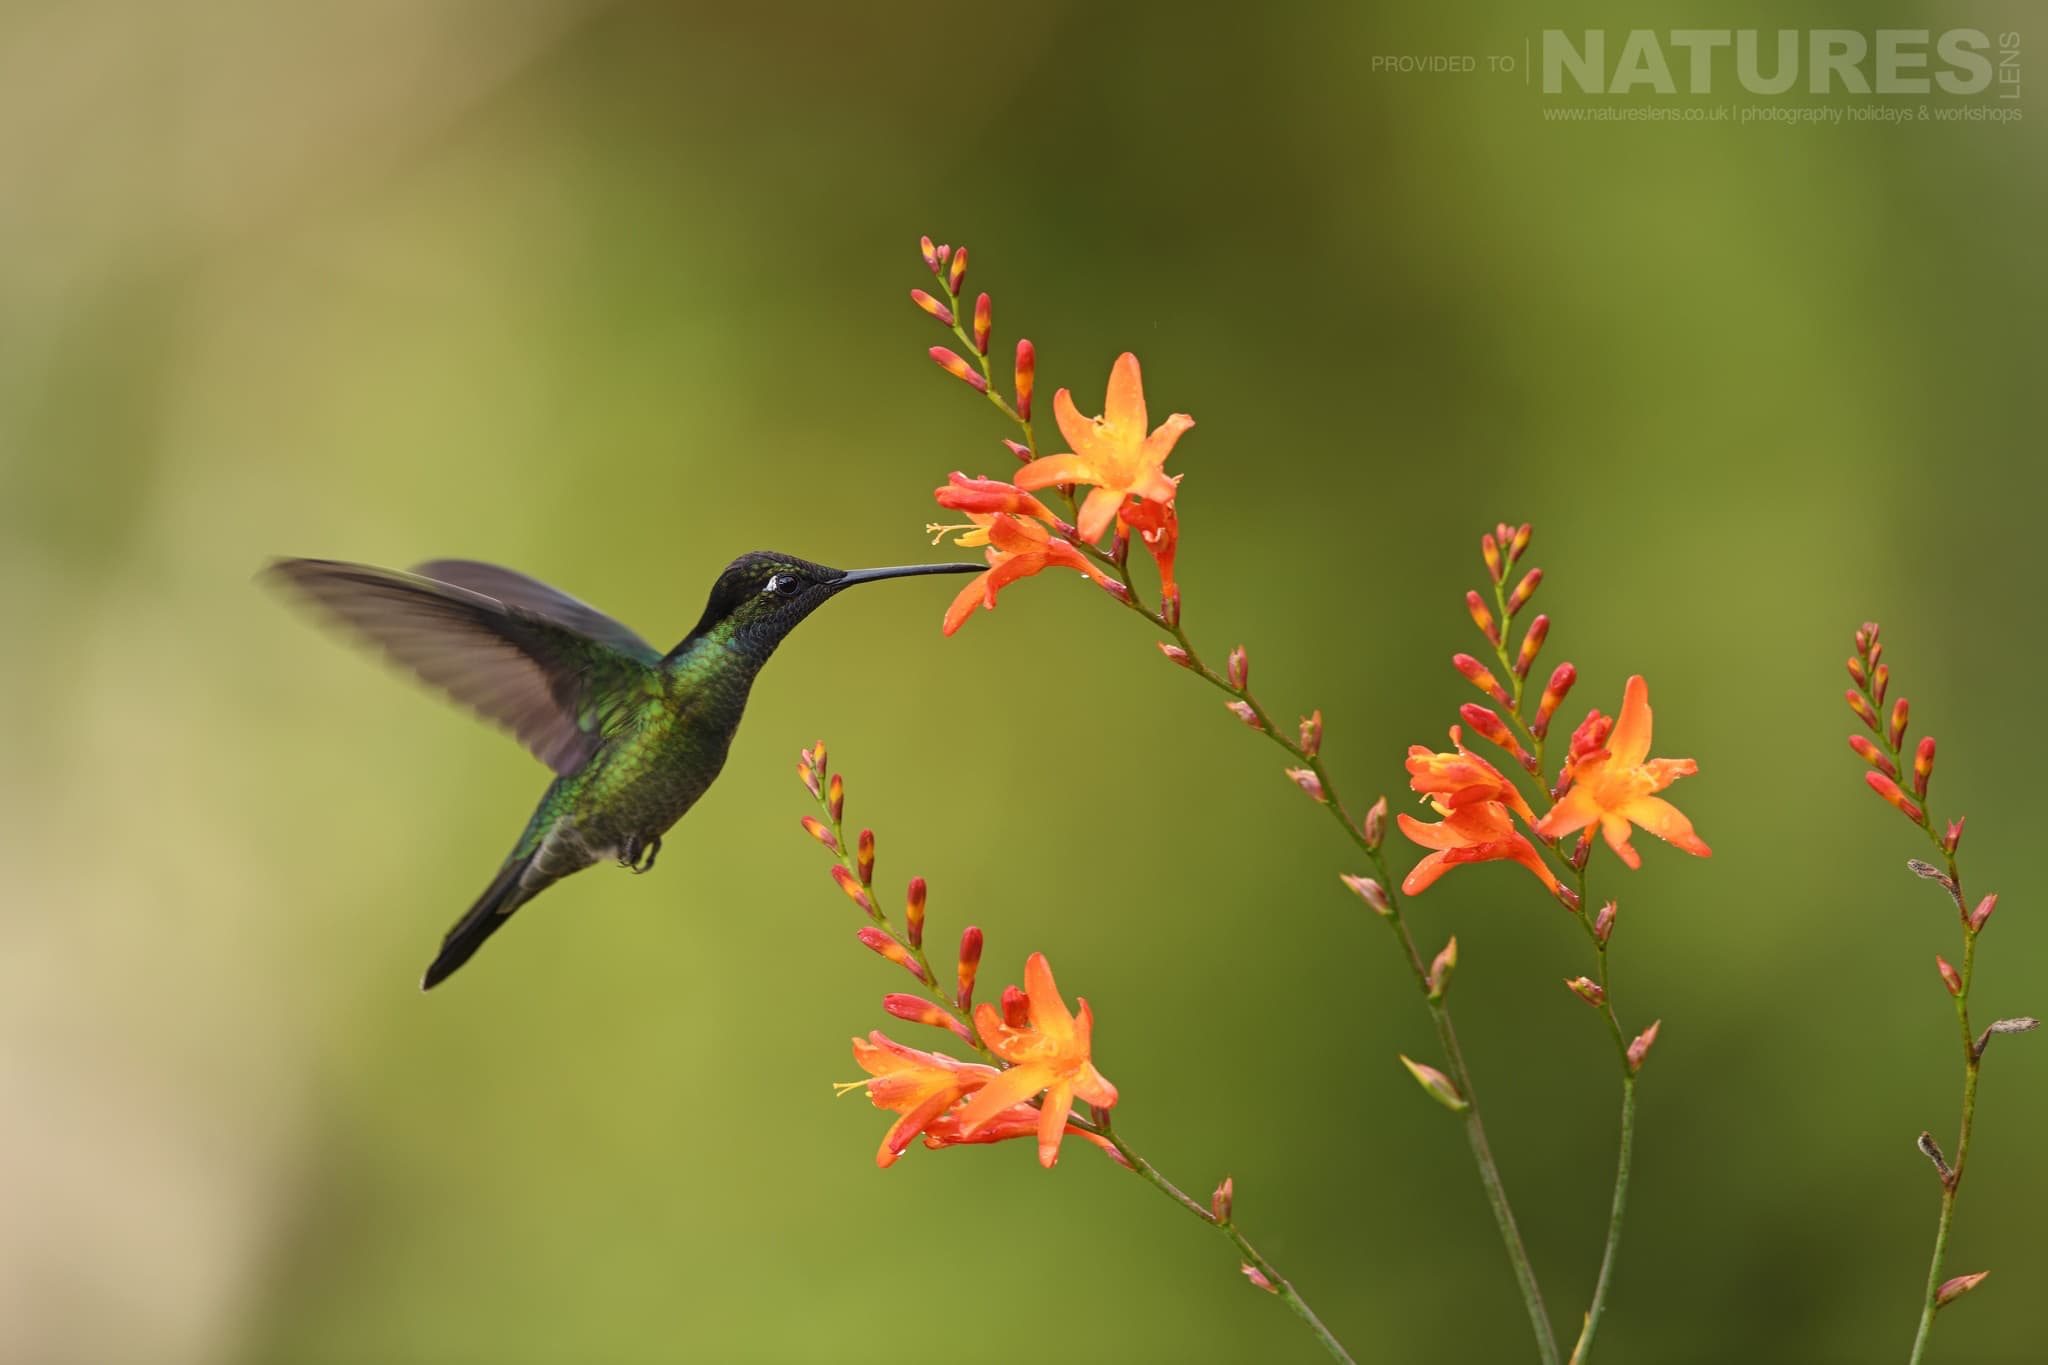 Hummingbirds Are Amongst The Other Species That We Will Be Able To Capture Images Of Which Can Be Photographed During The Natureslens Quetzals &Amp; Other Iconic Wildlife Of Costa Rica Photography Holiday